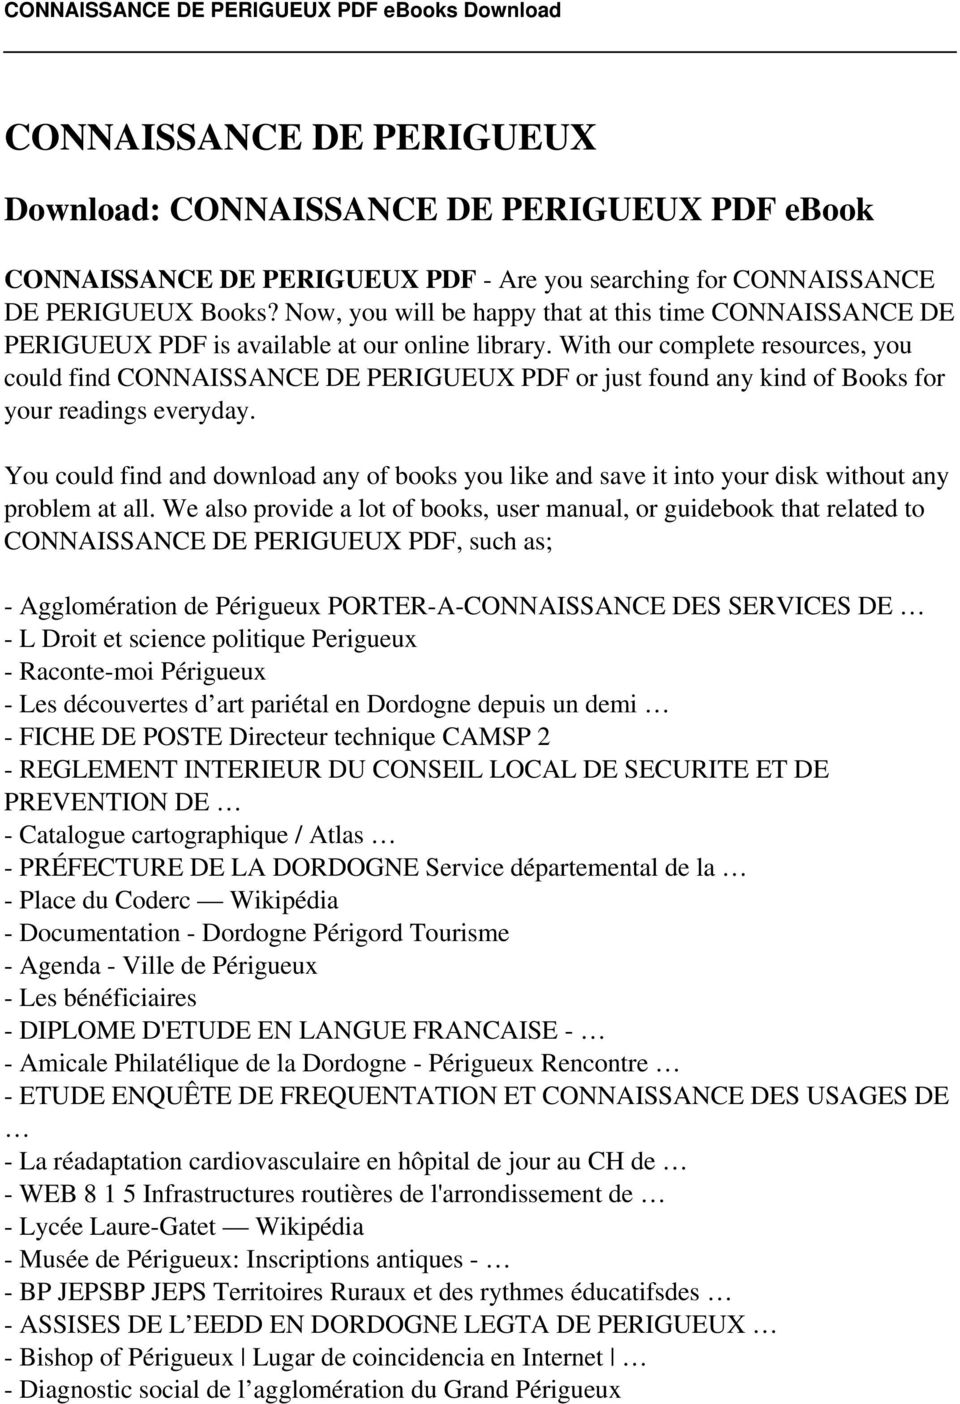 With our complete resources, you could find CONNAISSANCE DE PERIGUEUX PDF or just found any kind of Books for your readings everyday.